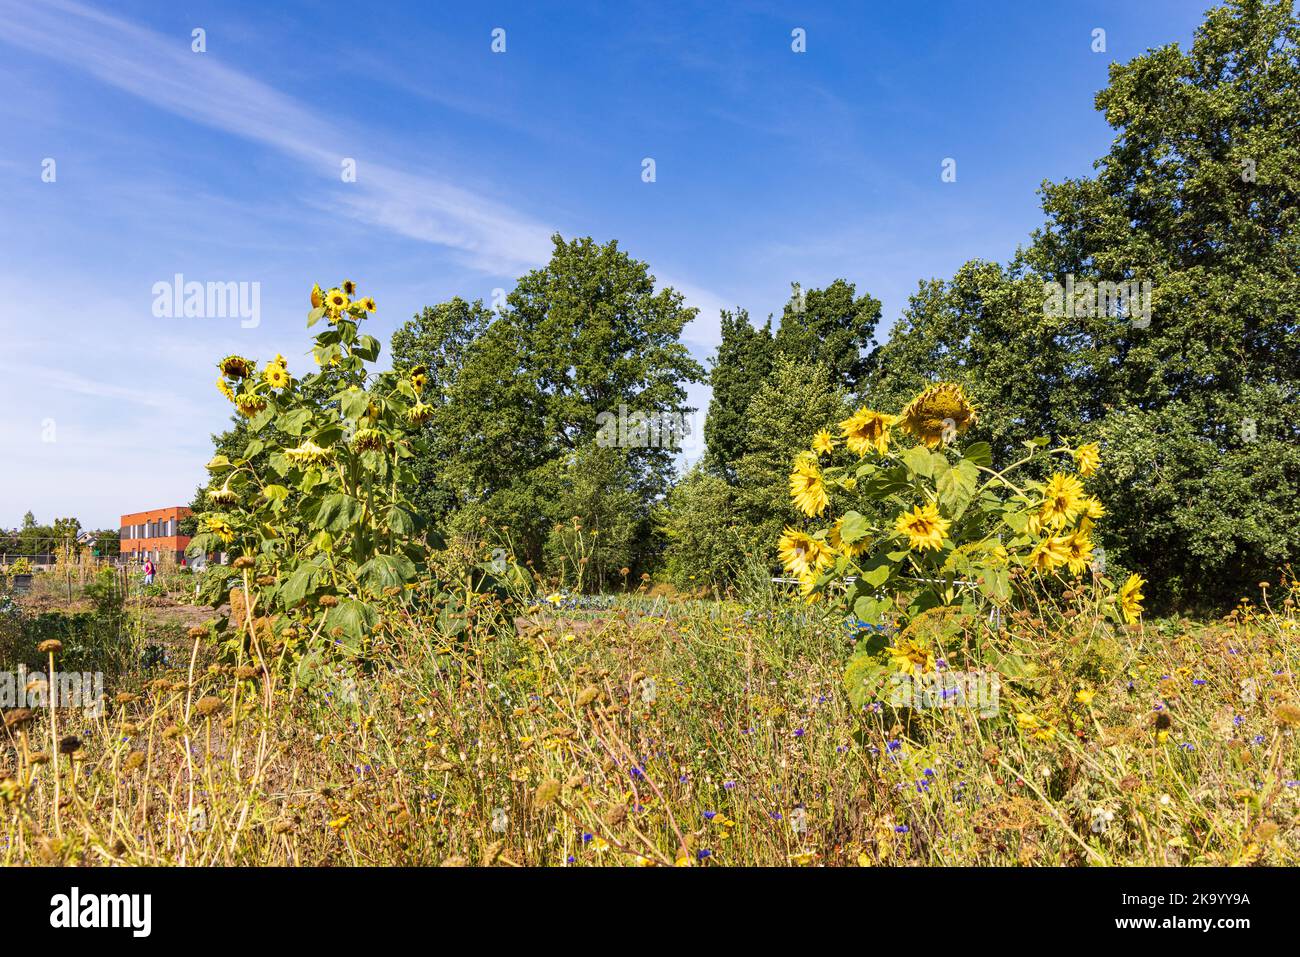 Allotment garden with wild flower field to attract insects in Marum in municipality Westerkwartier in Groningen province the Netherlands Stock Photo